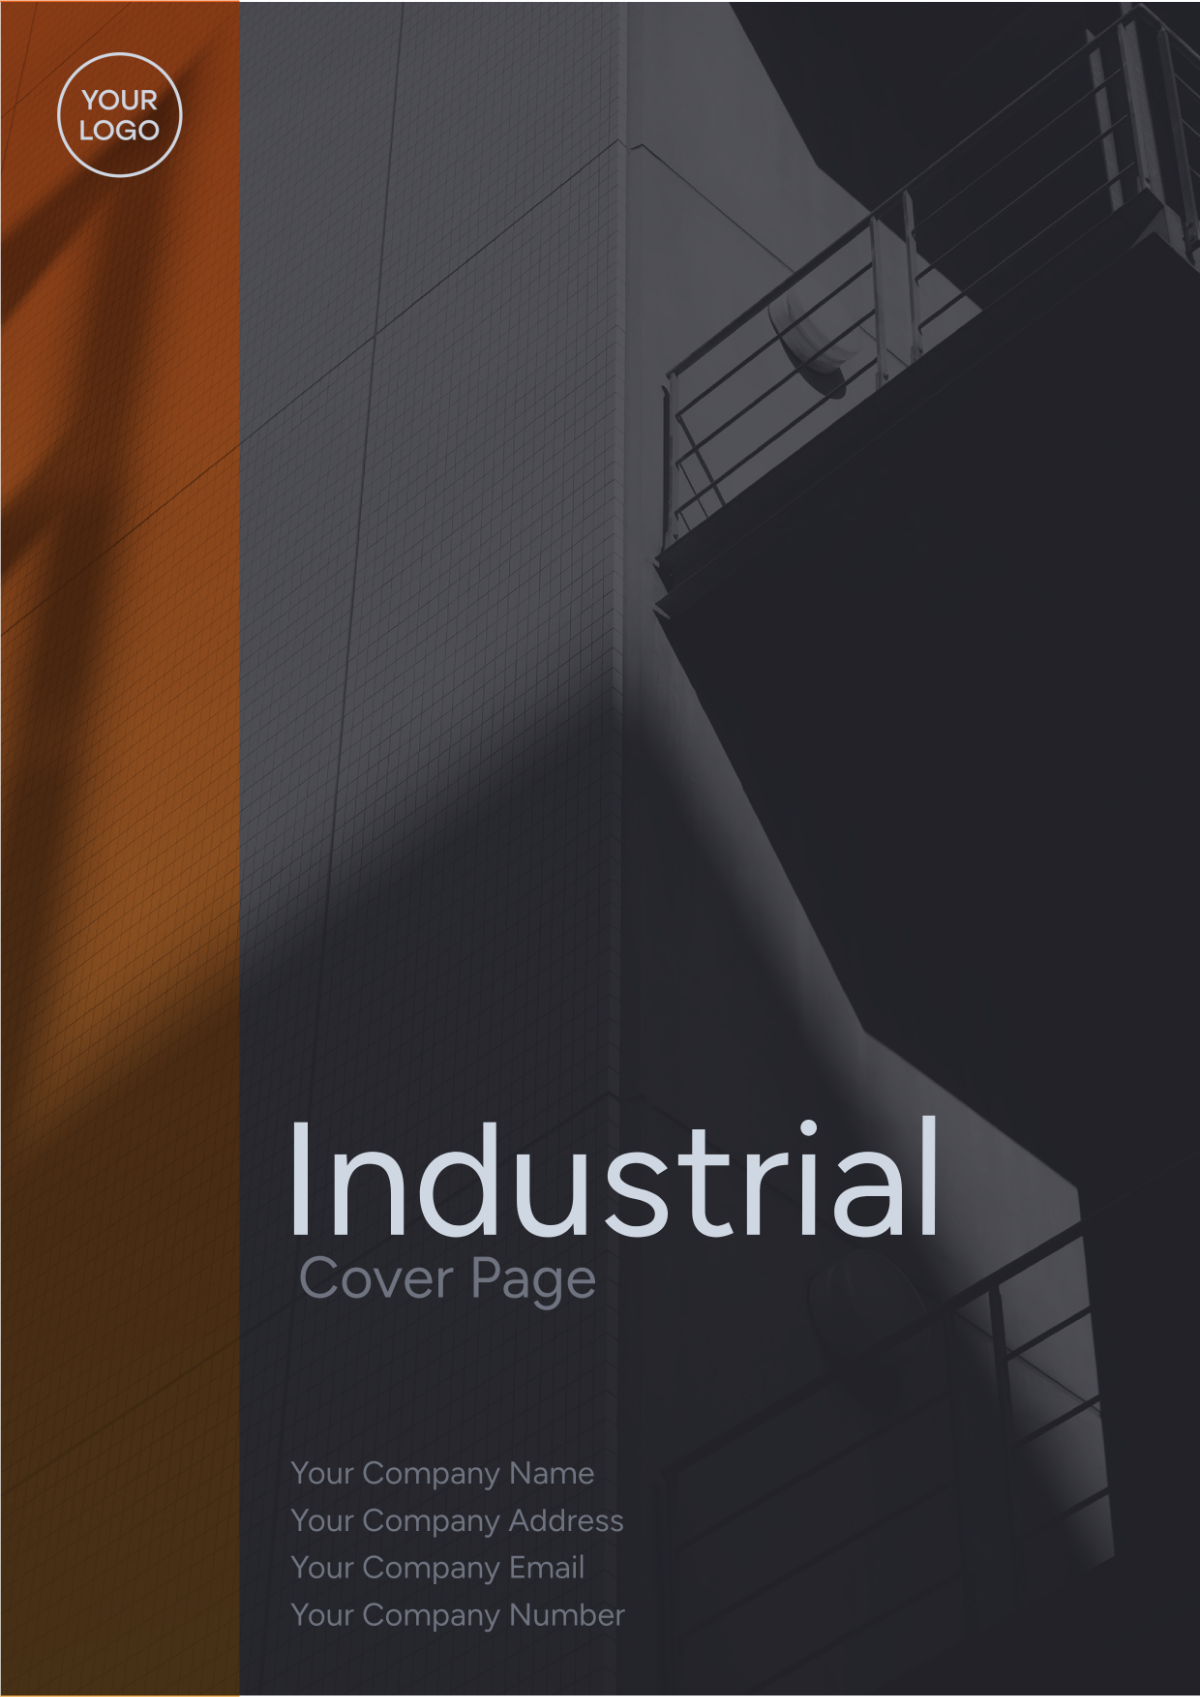 Industrial Heading Cover Page